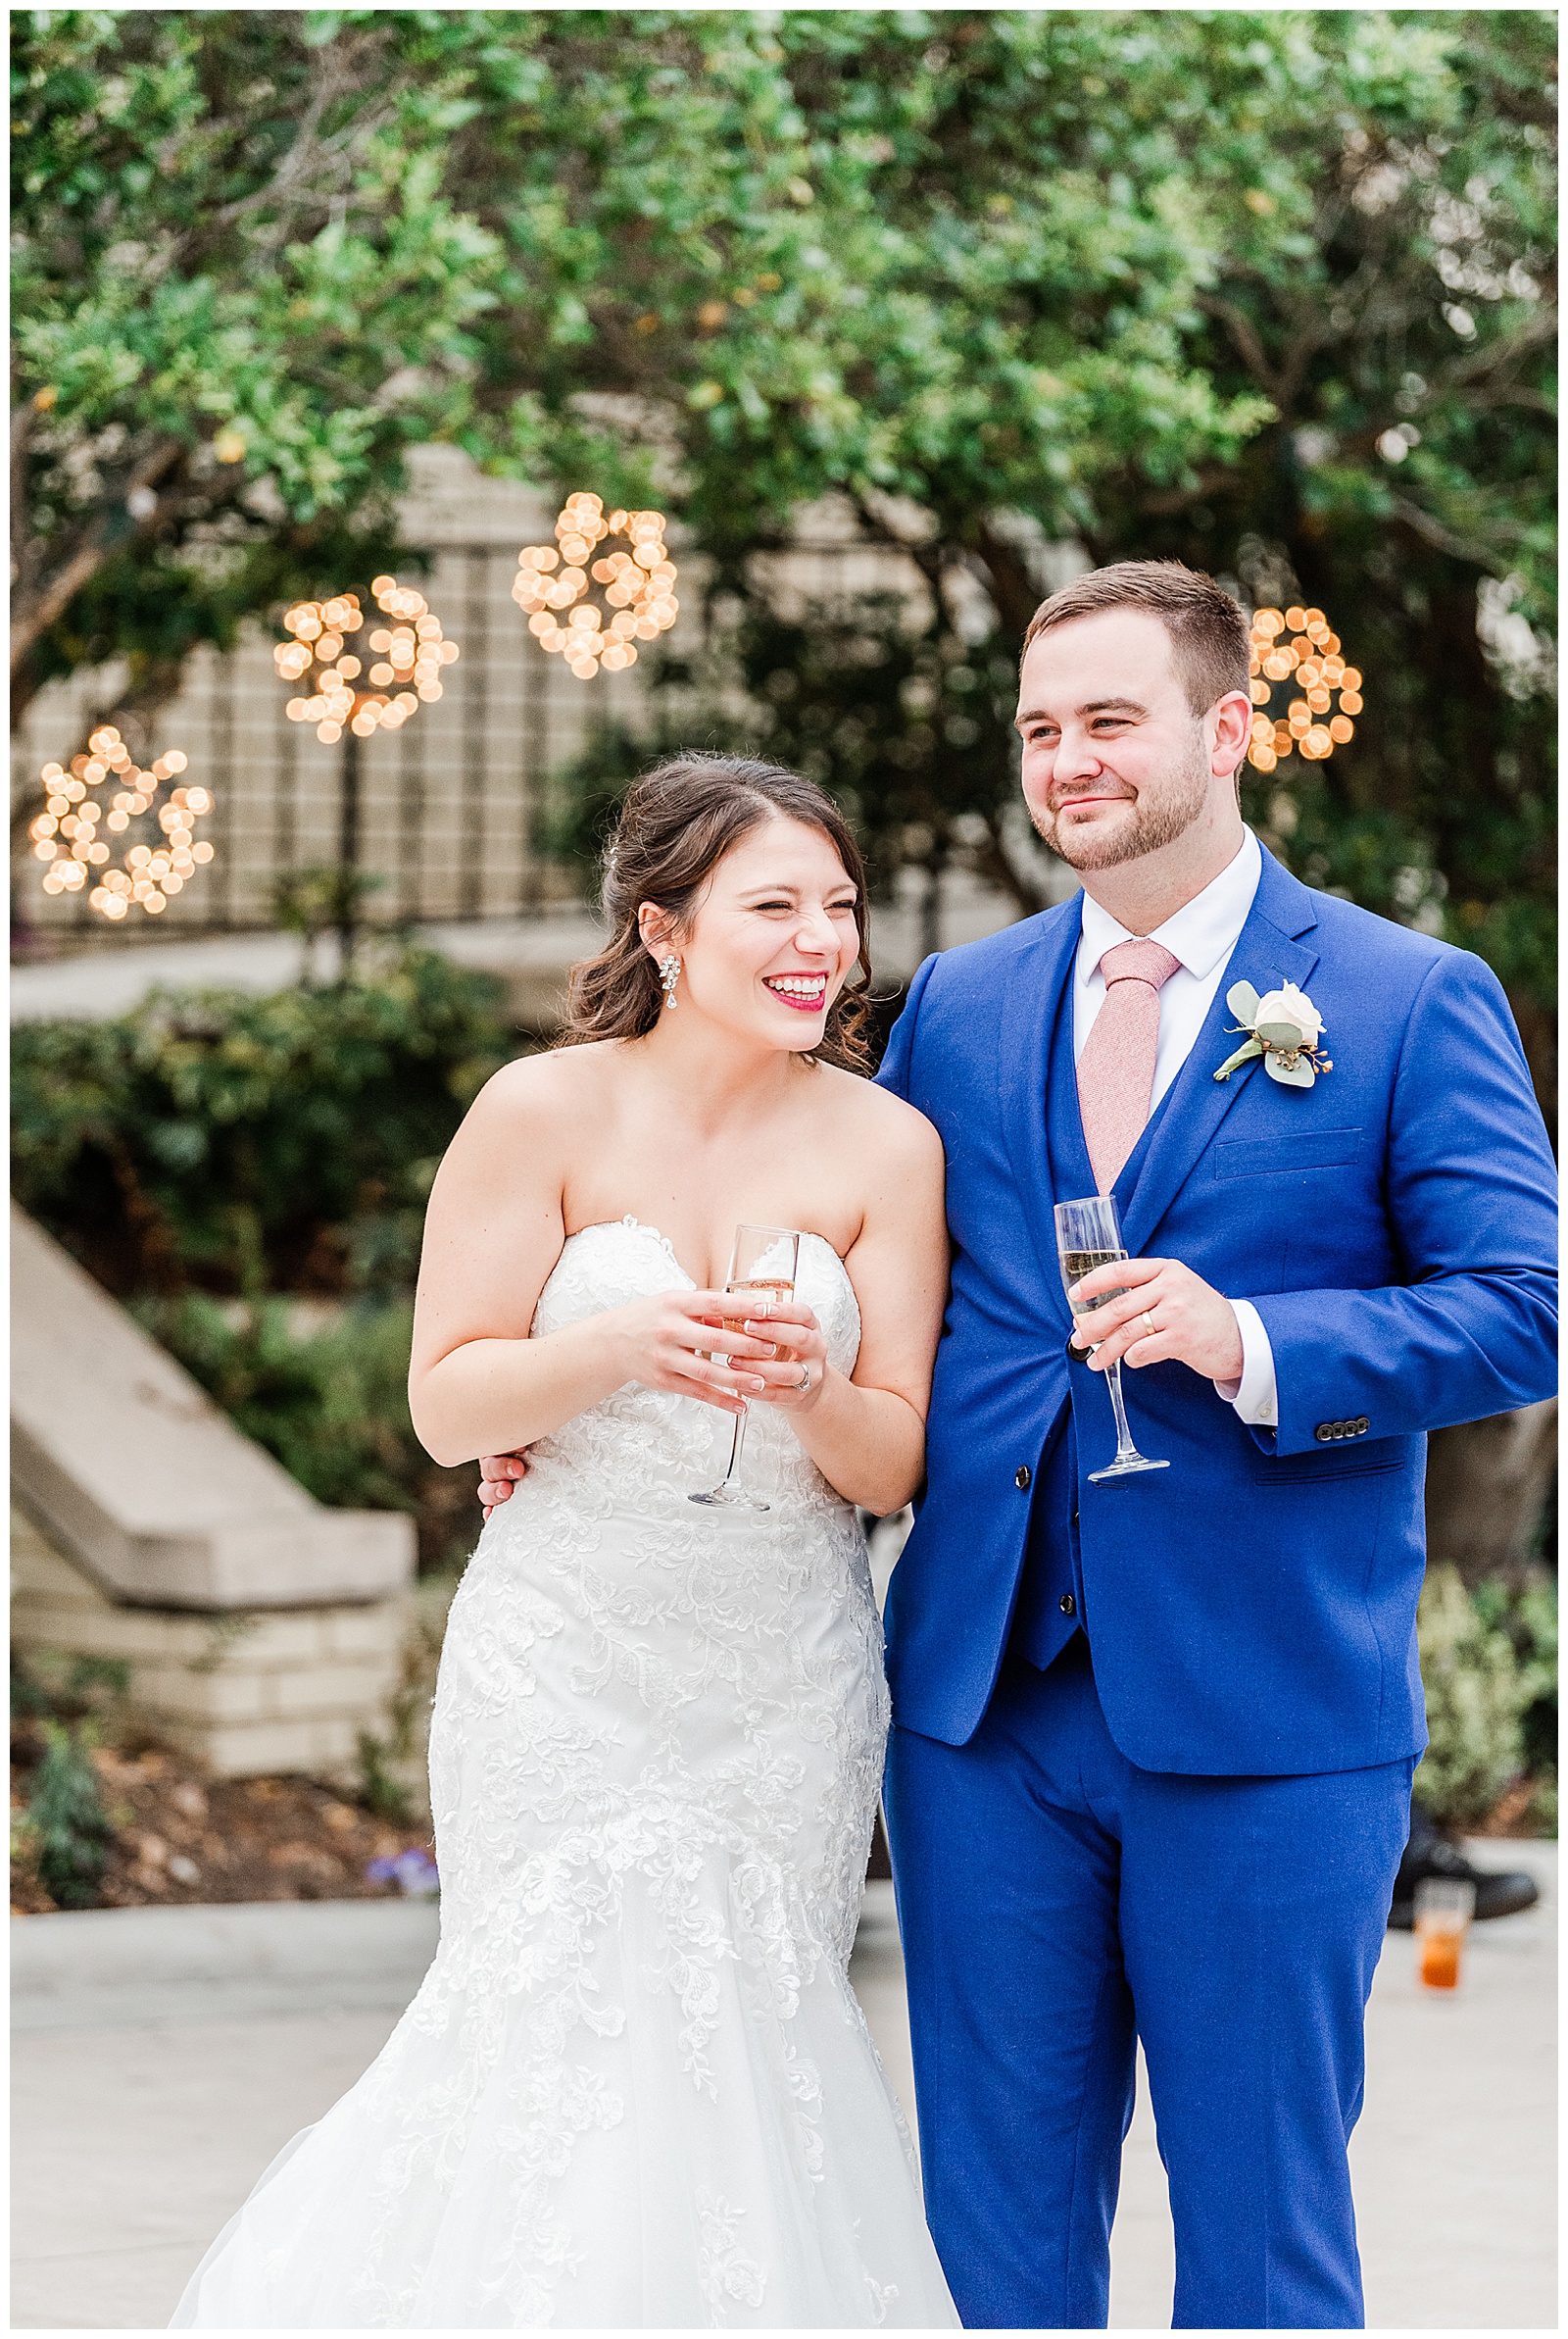 Adorable Bride and Groom at Wedding Reception from Light and Airy Outdoor Wedding at Separk Mansion in Gastonia, NC | Kevyn Dixon Photography